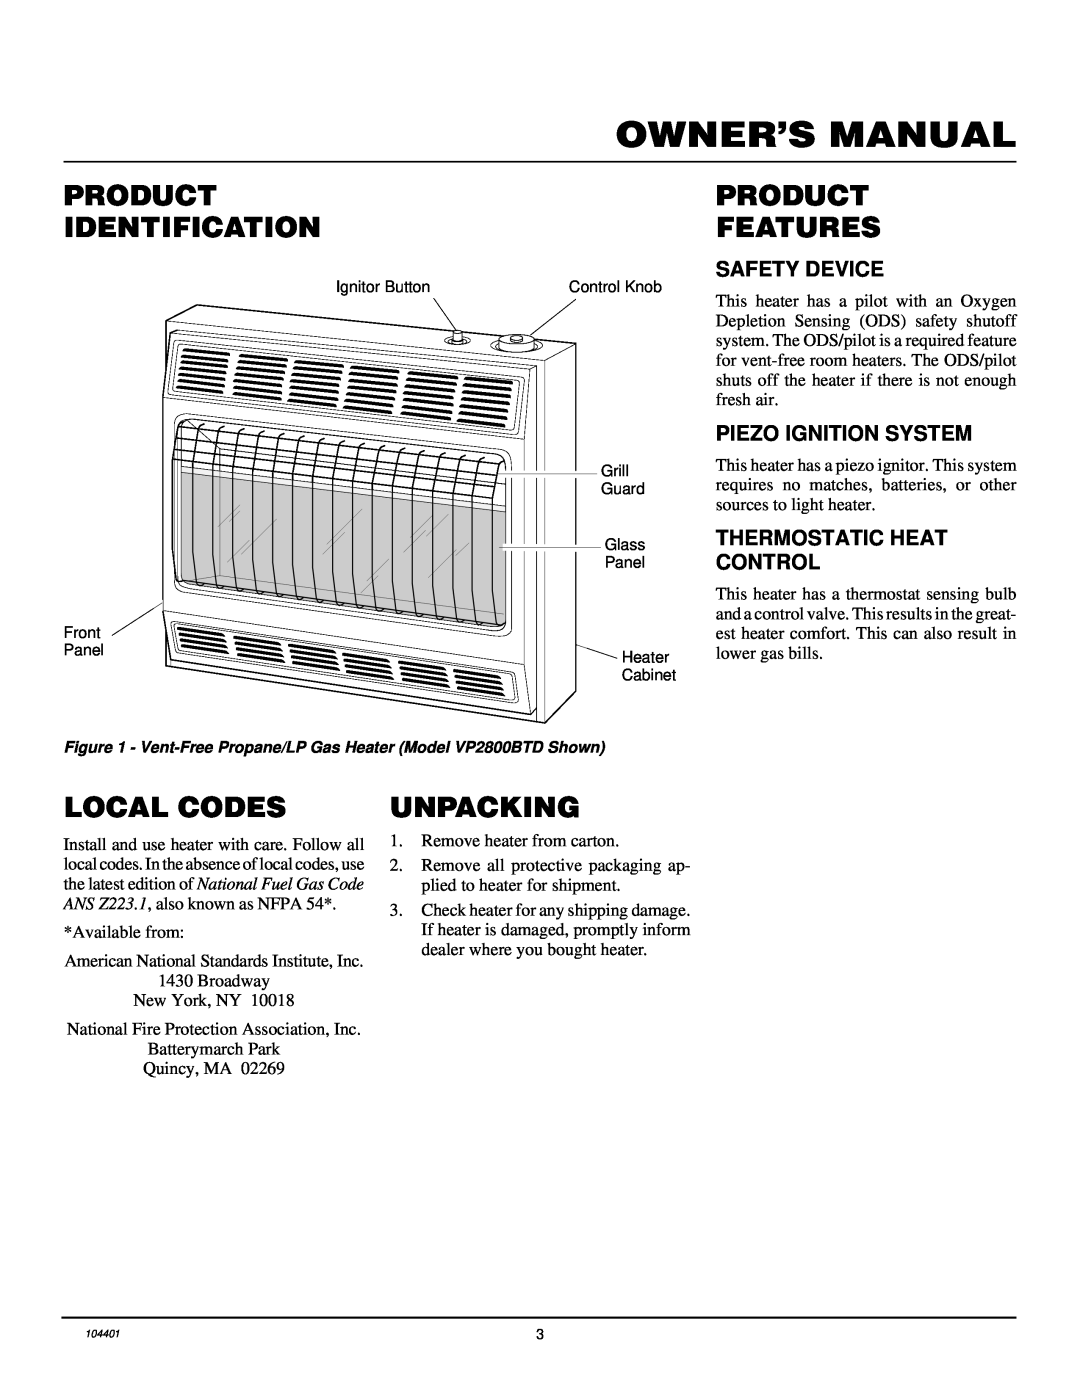 Vanguard Heating VP2000BTD Owner’S Manual, Product Identification, Product Features, Local Codes, Unpacking, Safety Device 